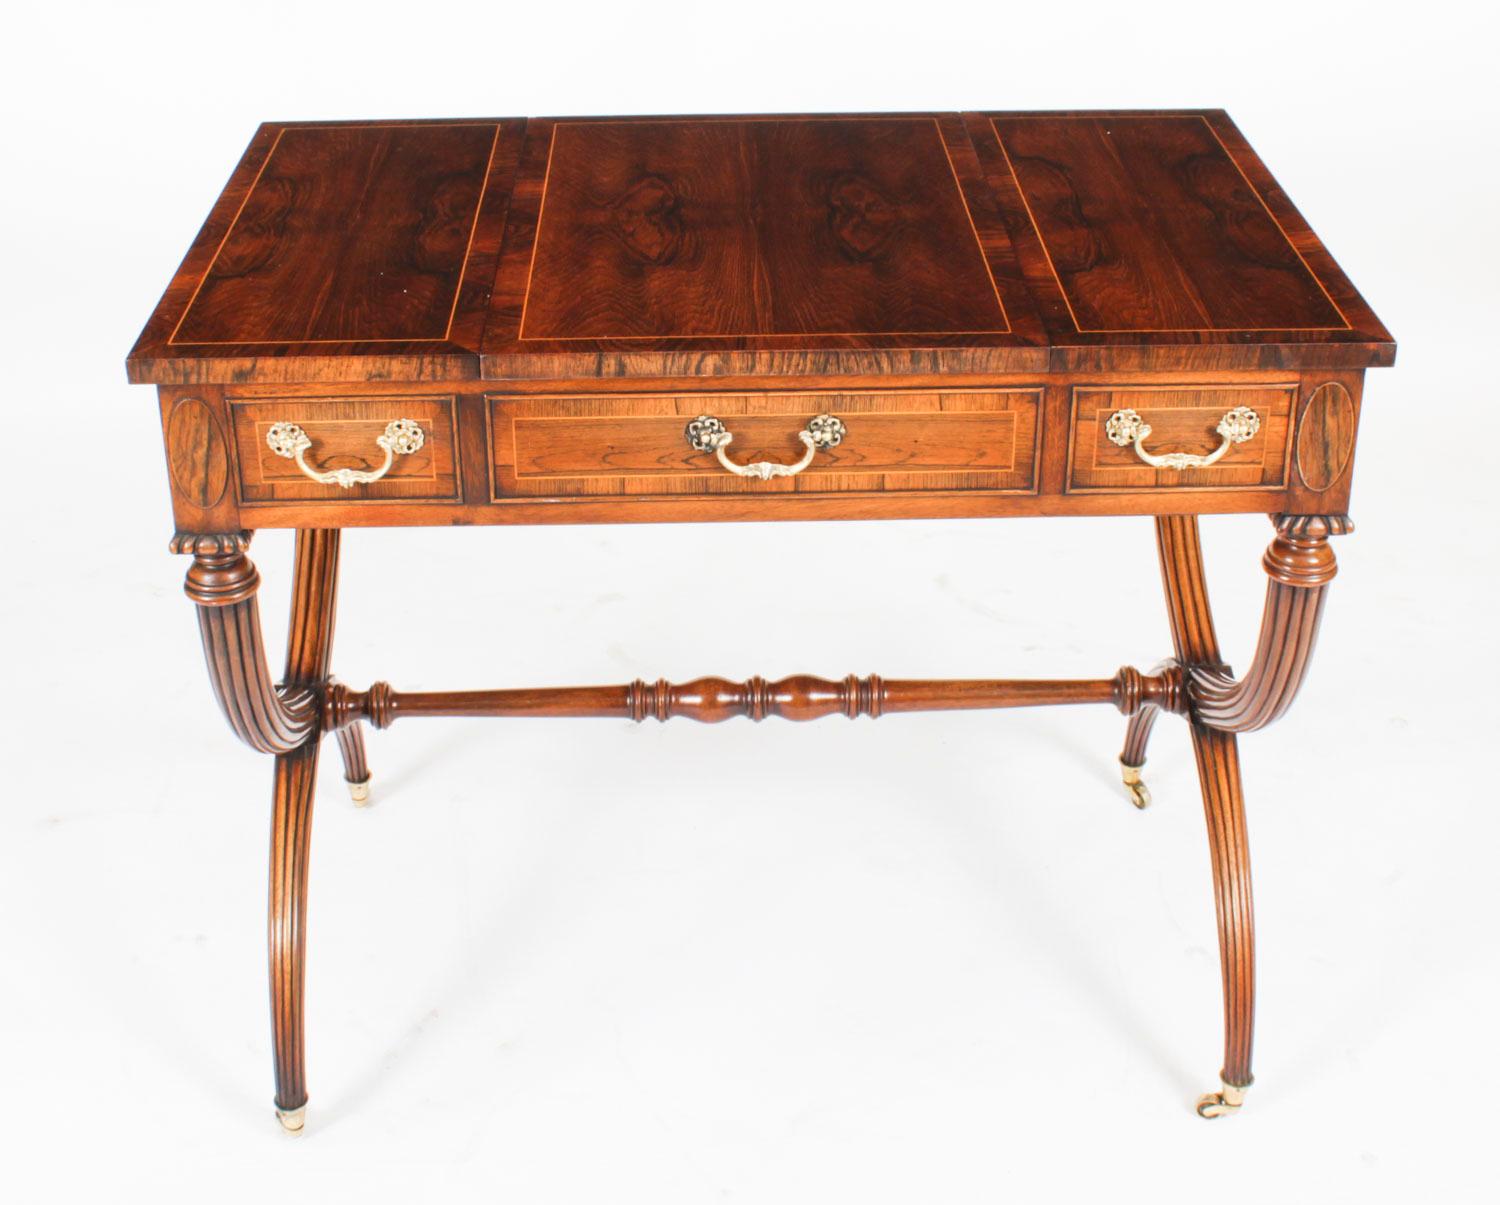 This is a fabulous antique  late Victorian burr walnut games and writing table, circa 1890 in date.

It is made of beautiful burr walnut that has elegant satinwood line inlaid banding. The sliding top opens and can be removed to reveal a fabulous